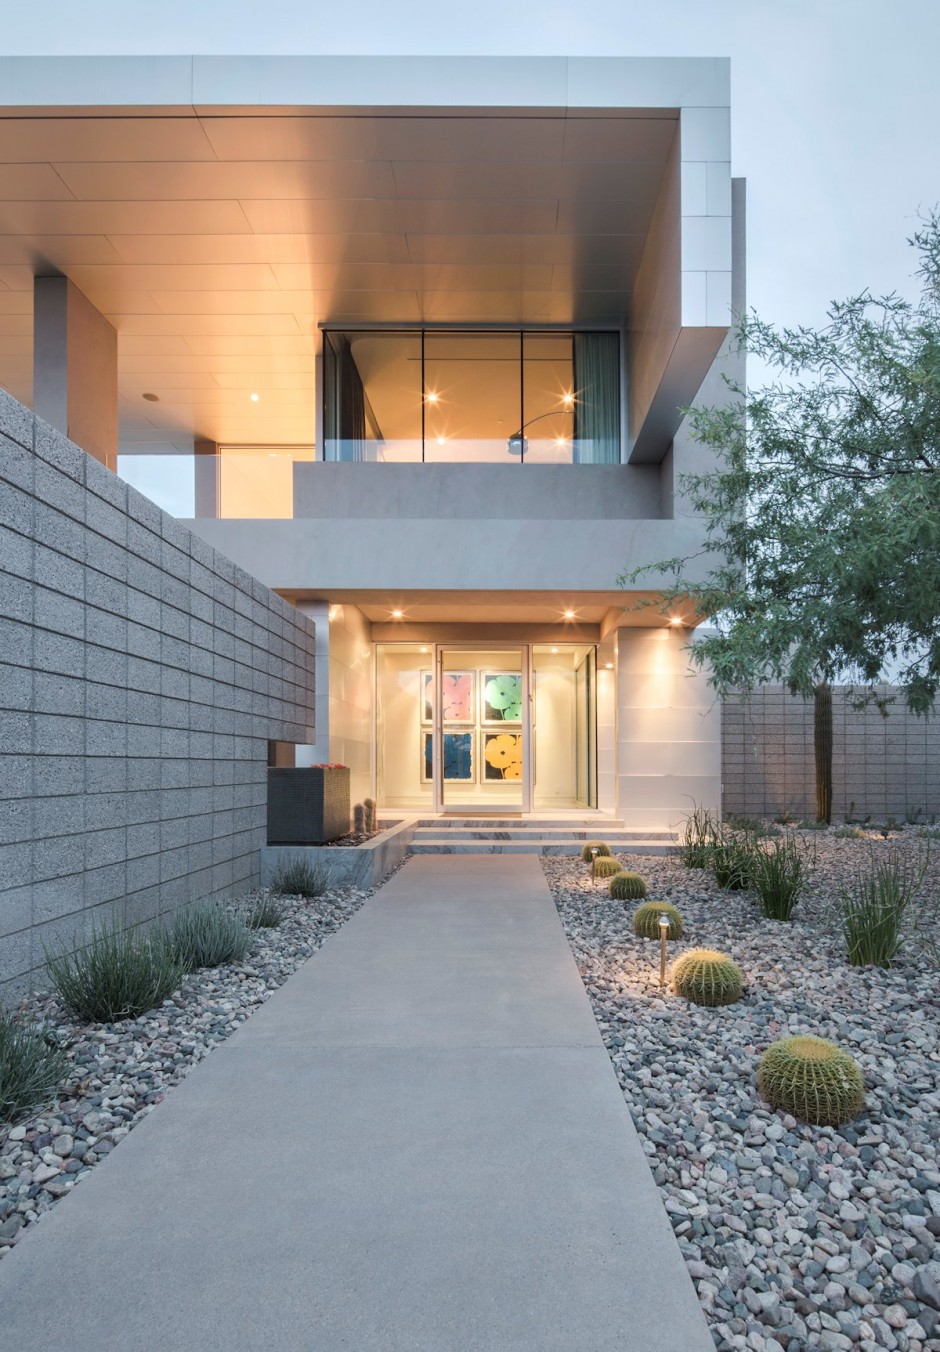 Exterior Design Nest Excellent Exterior Design Of Birds Nest Residence With Stunning Alley Featured With Concrete Steps Surrounded With Gravels With Greens Architecture Geometric Shape House With Luminous Interiors